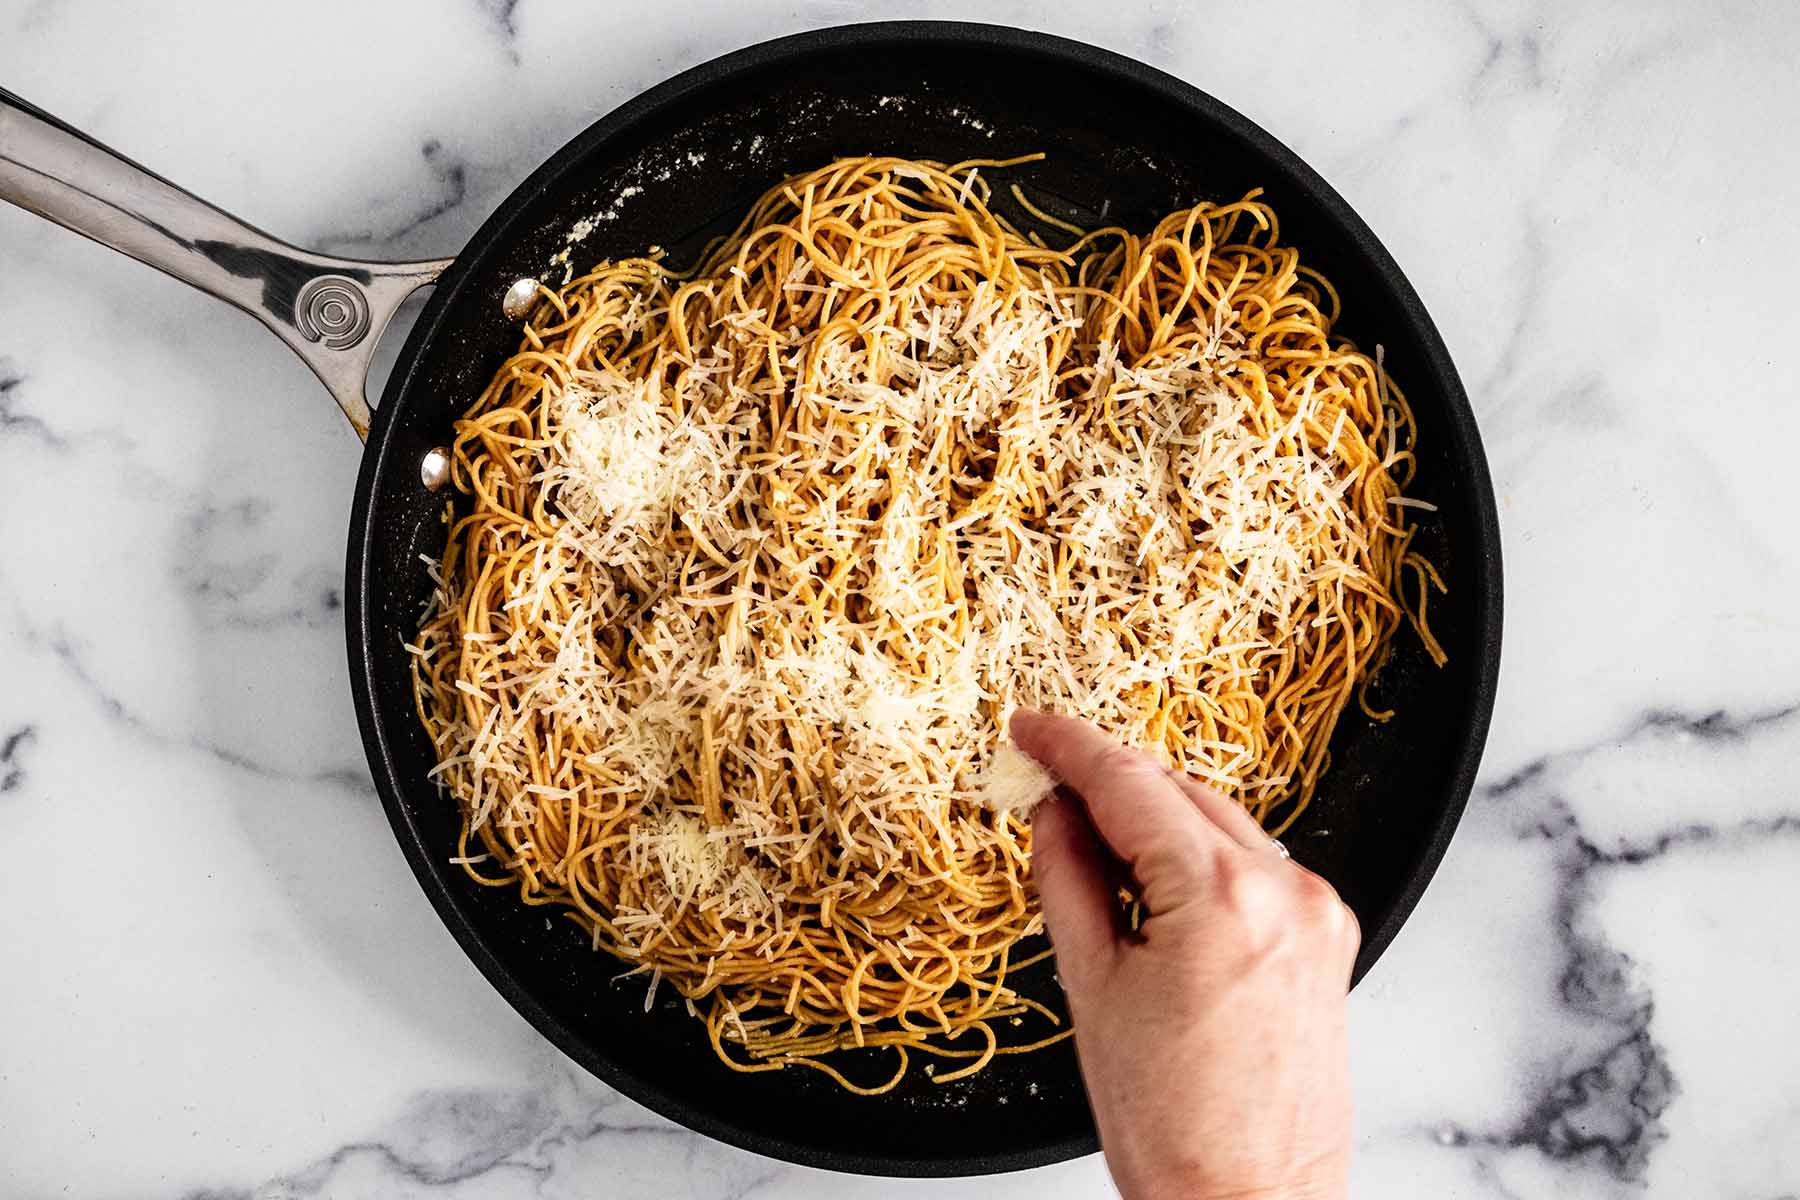 Sprinkling grated Parmesan cheese on top of noodles.